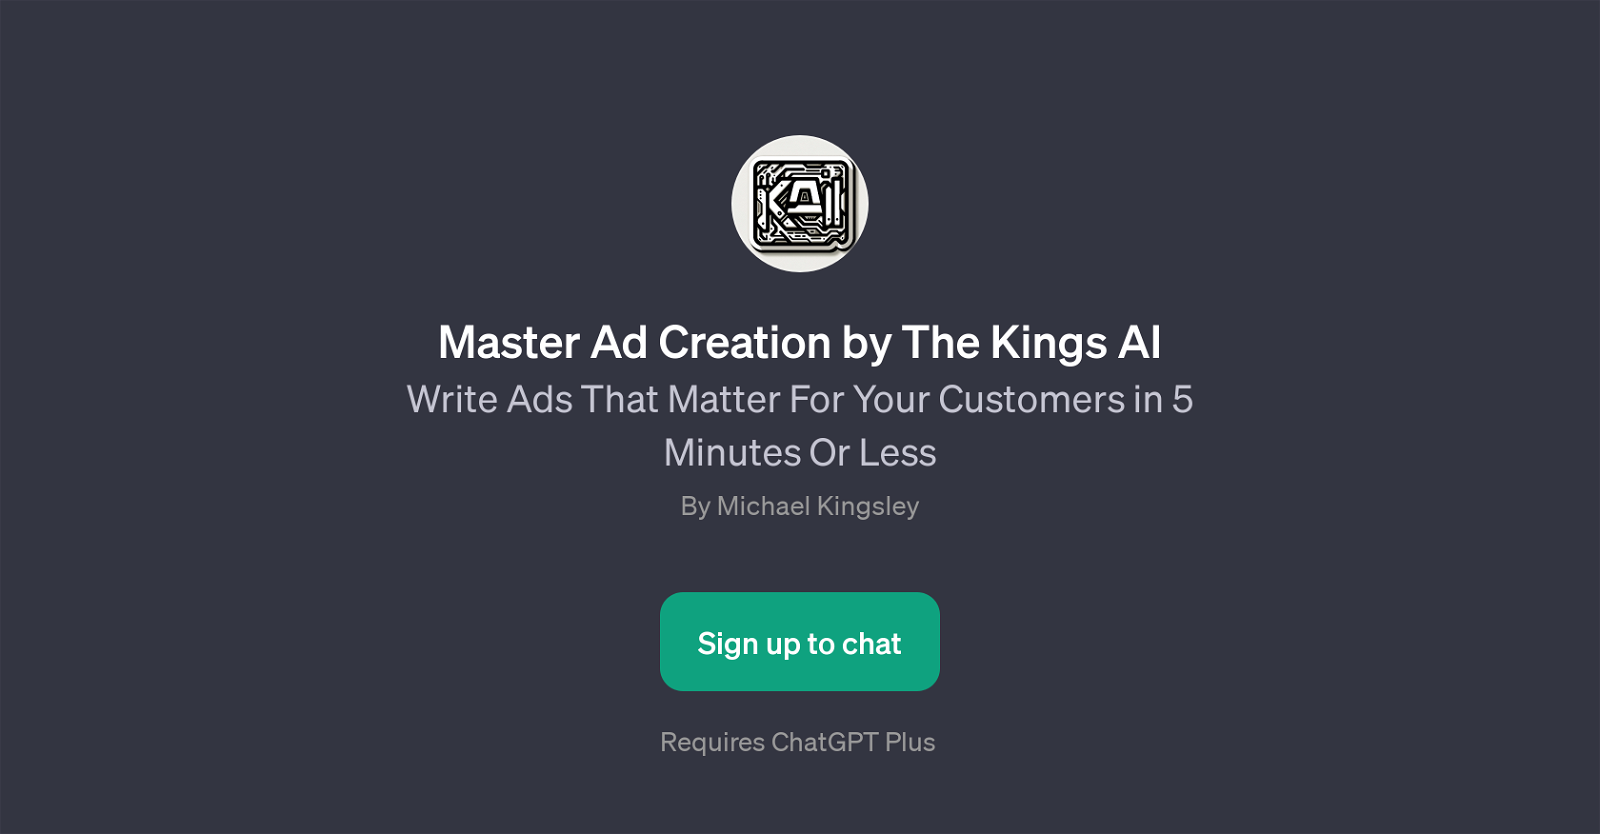 Master Ad Creation by The Kings AI website